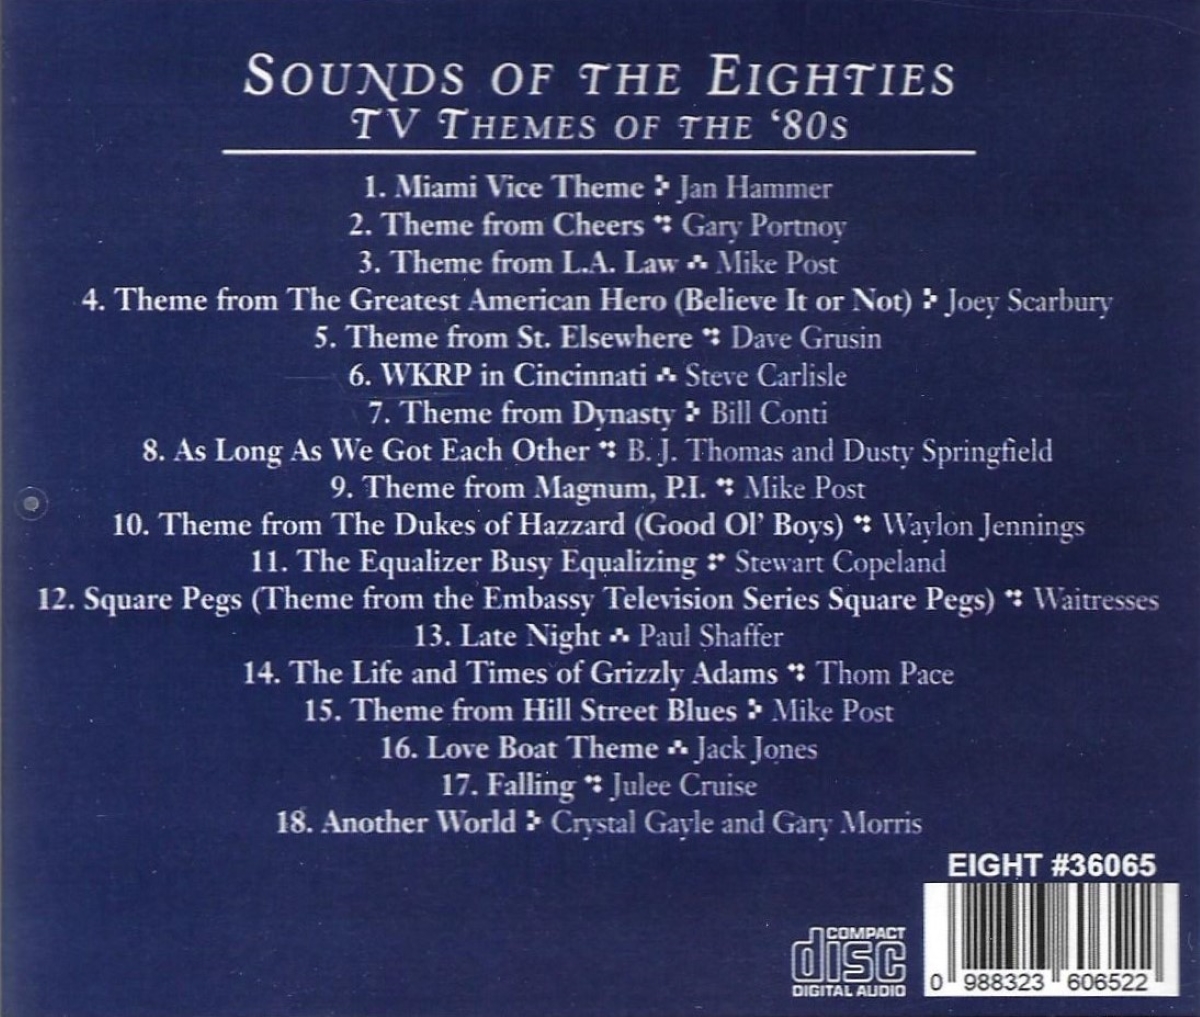 Sounds Of The Eighties: TV Themes Of The '80s